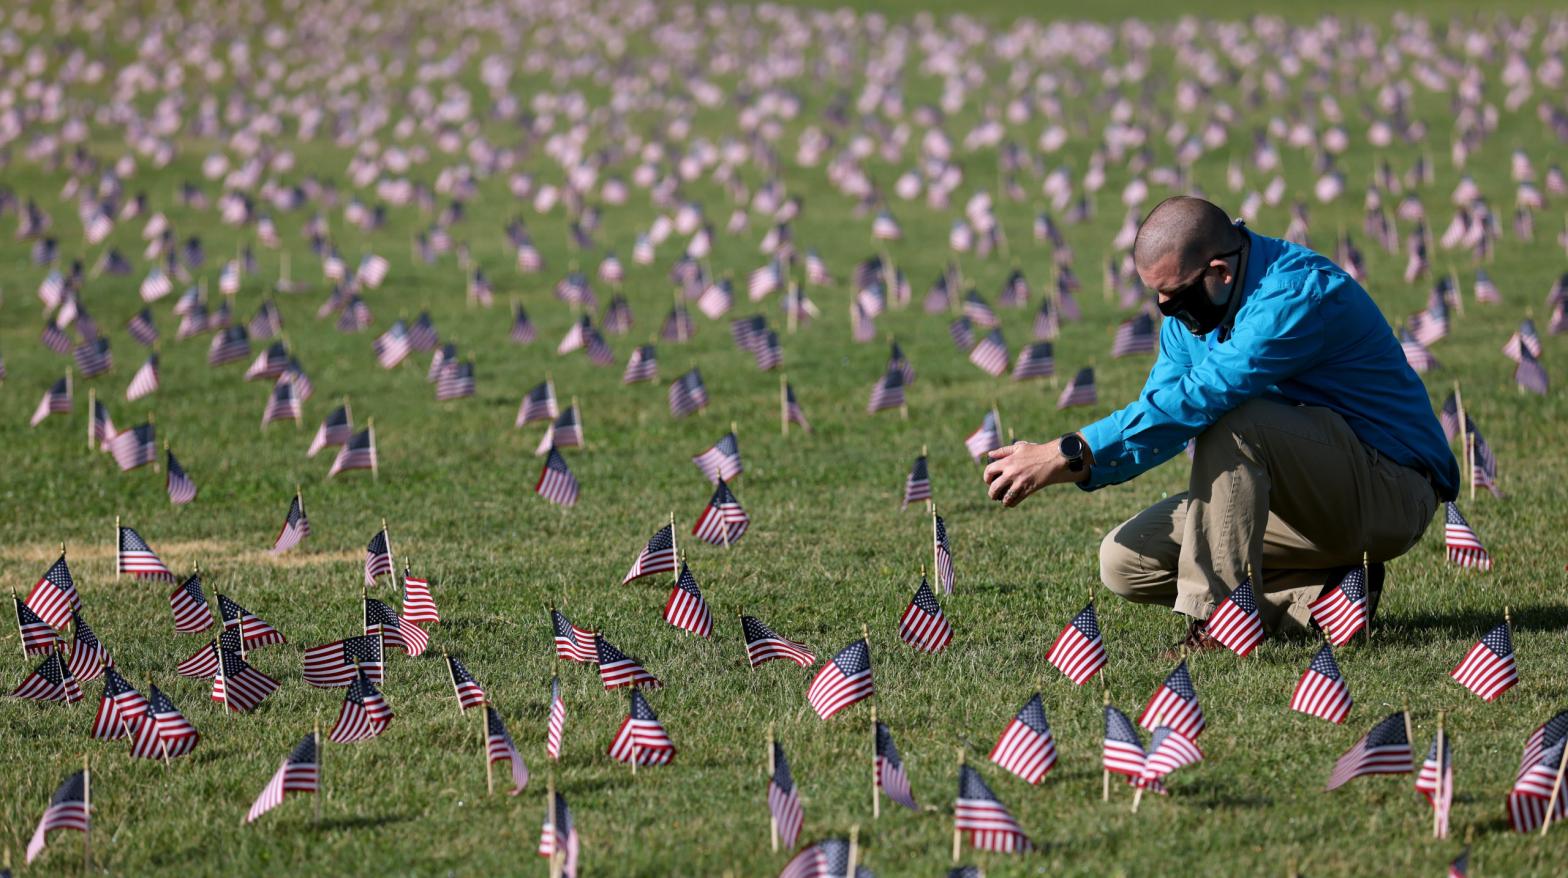 Chris Duncan, whose 75-year-old mother Constance died from the viral illness, photographs a COVID Memorial Project installation of 20,000 American flags meant to mourn the then 200,000 U.S. lives lost in the pandemic on September 22, 2020 in Washington, DC (Photo: Win McNamee, Getty Images)